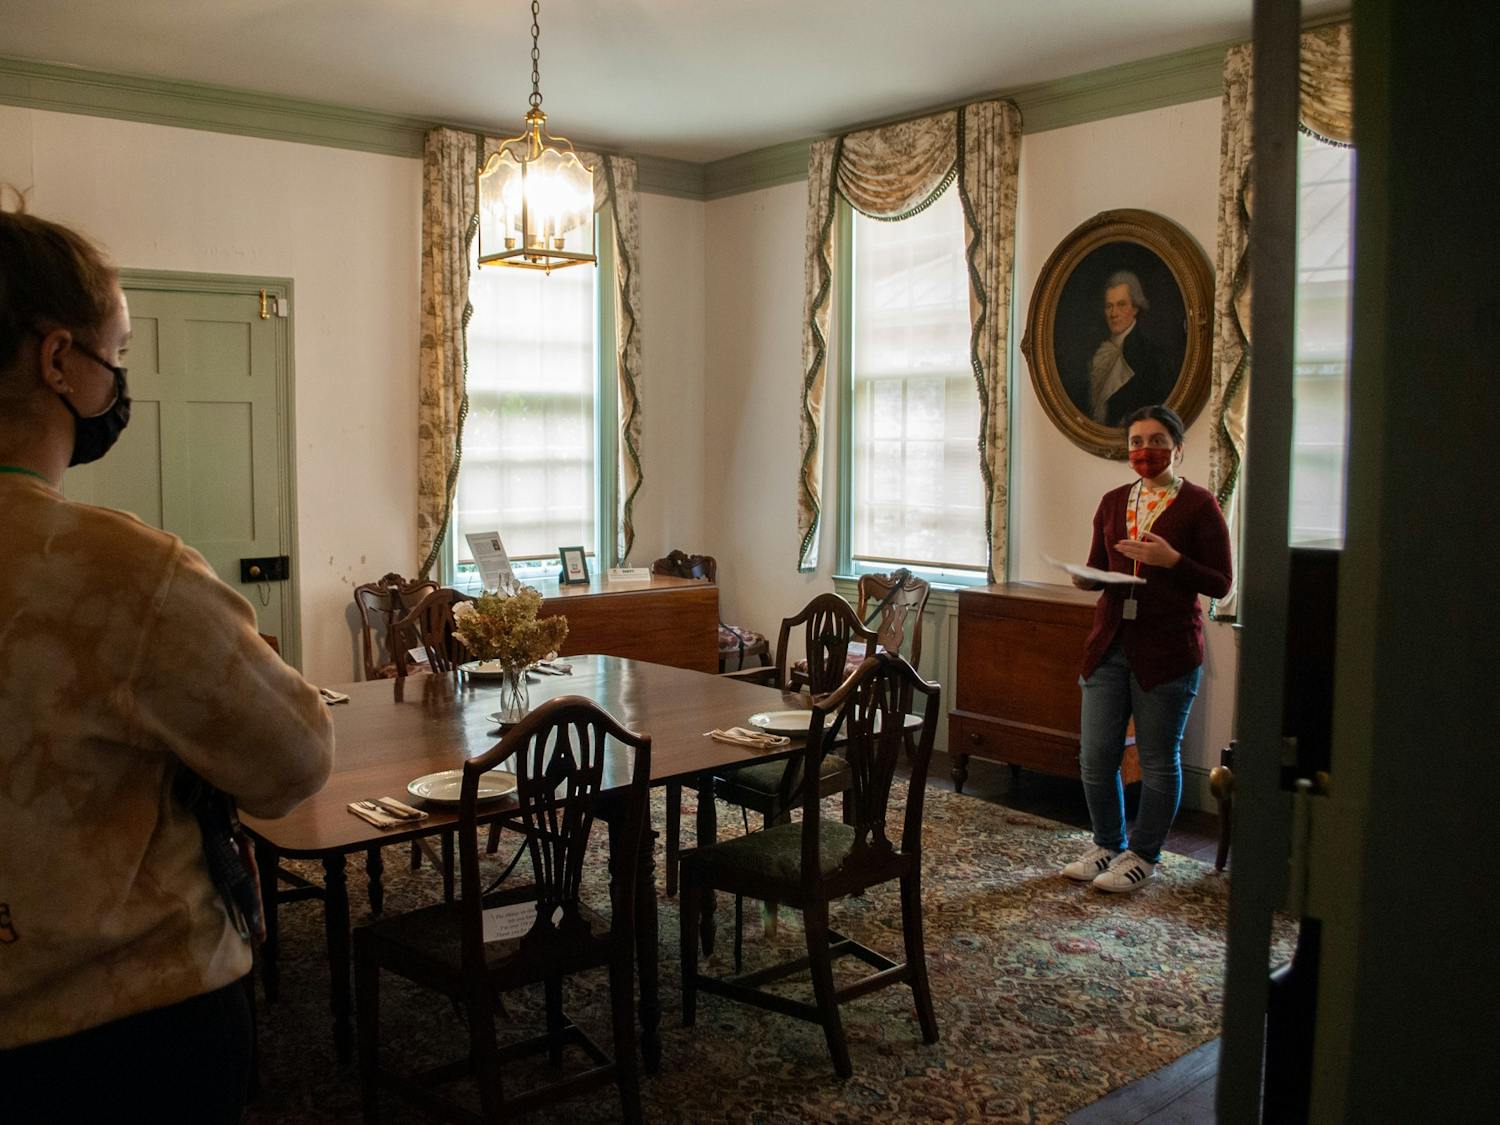 Sarah Waugh of the UNC class of 2020 gives a tour inside of the Burwell School Historic Site in Hillsborough, N.C.